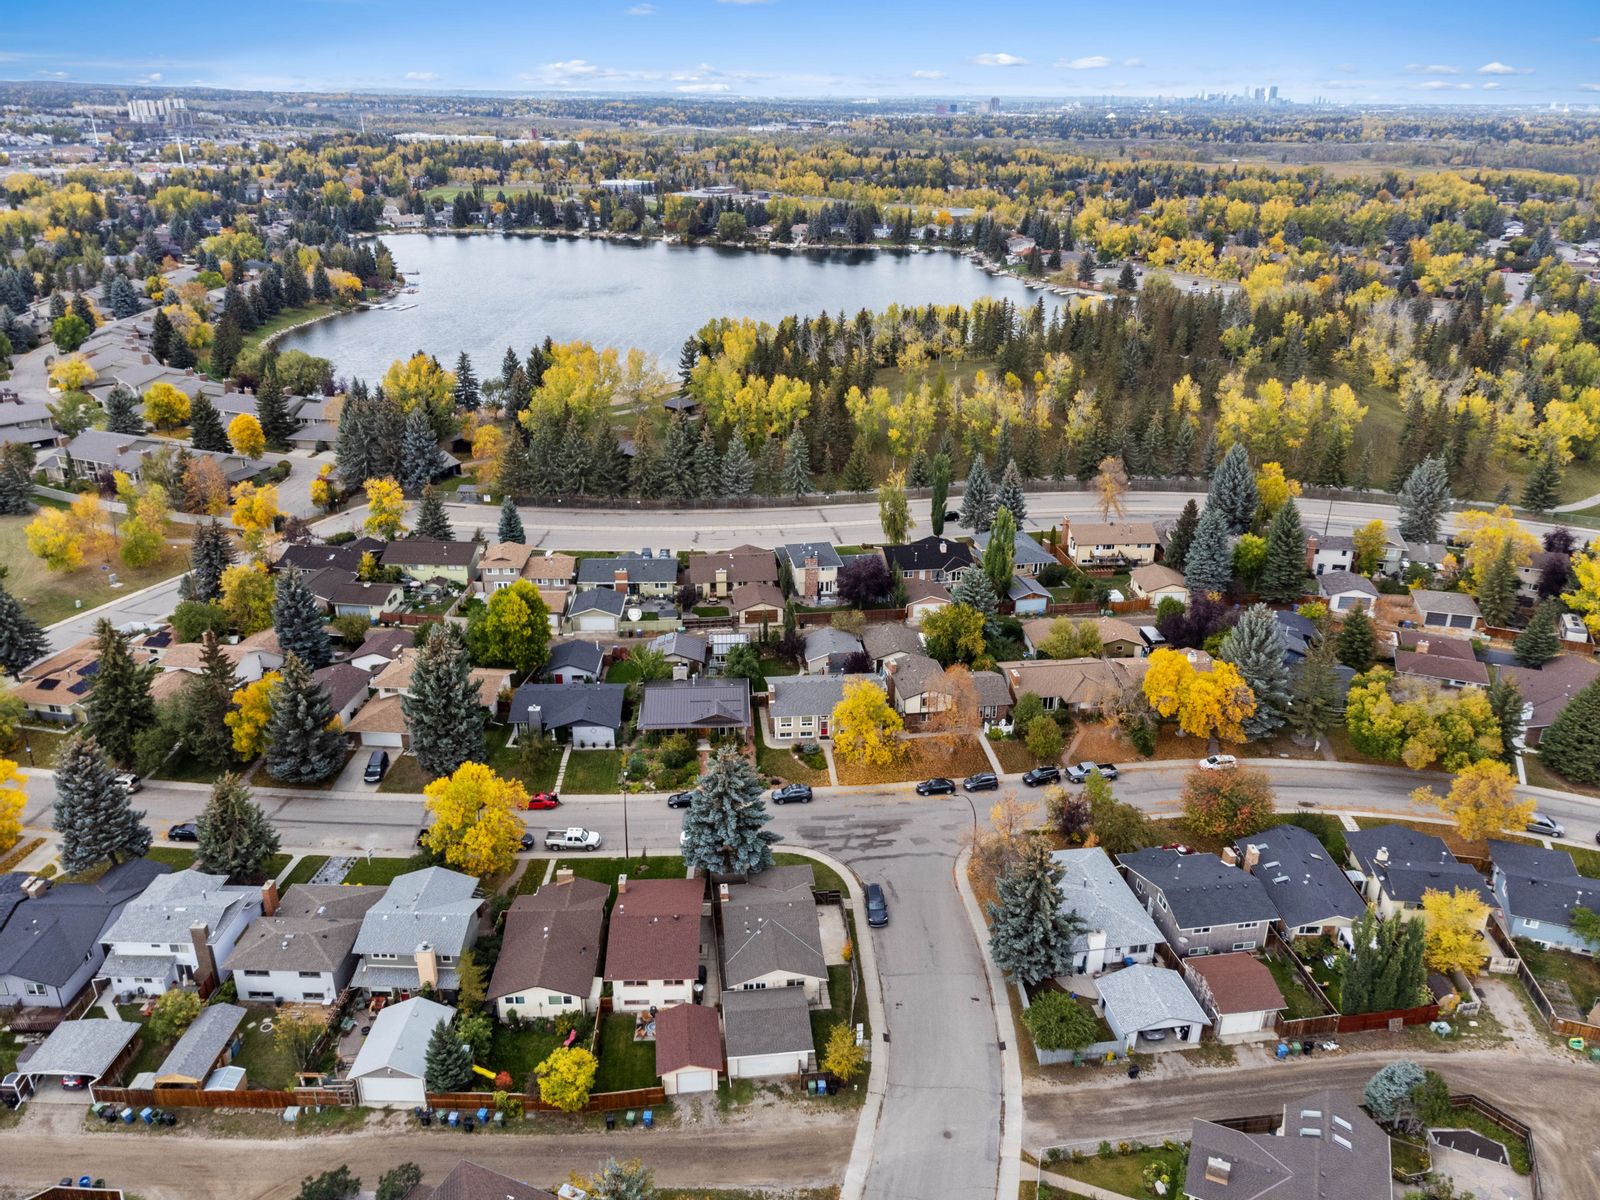 Midnapore: A Community Gem in South Calgary